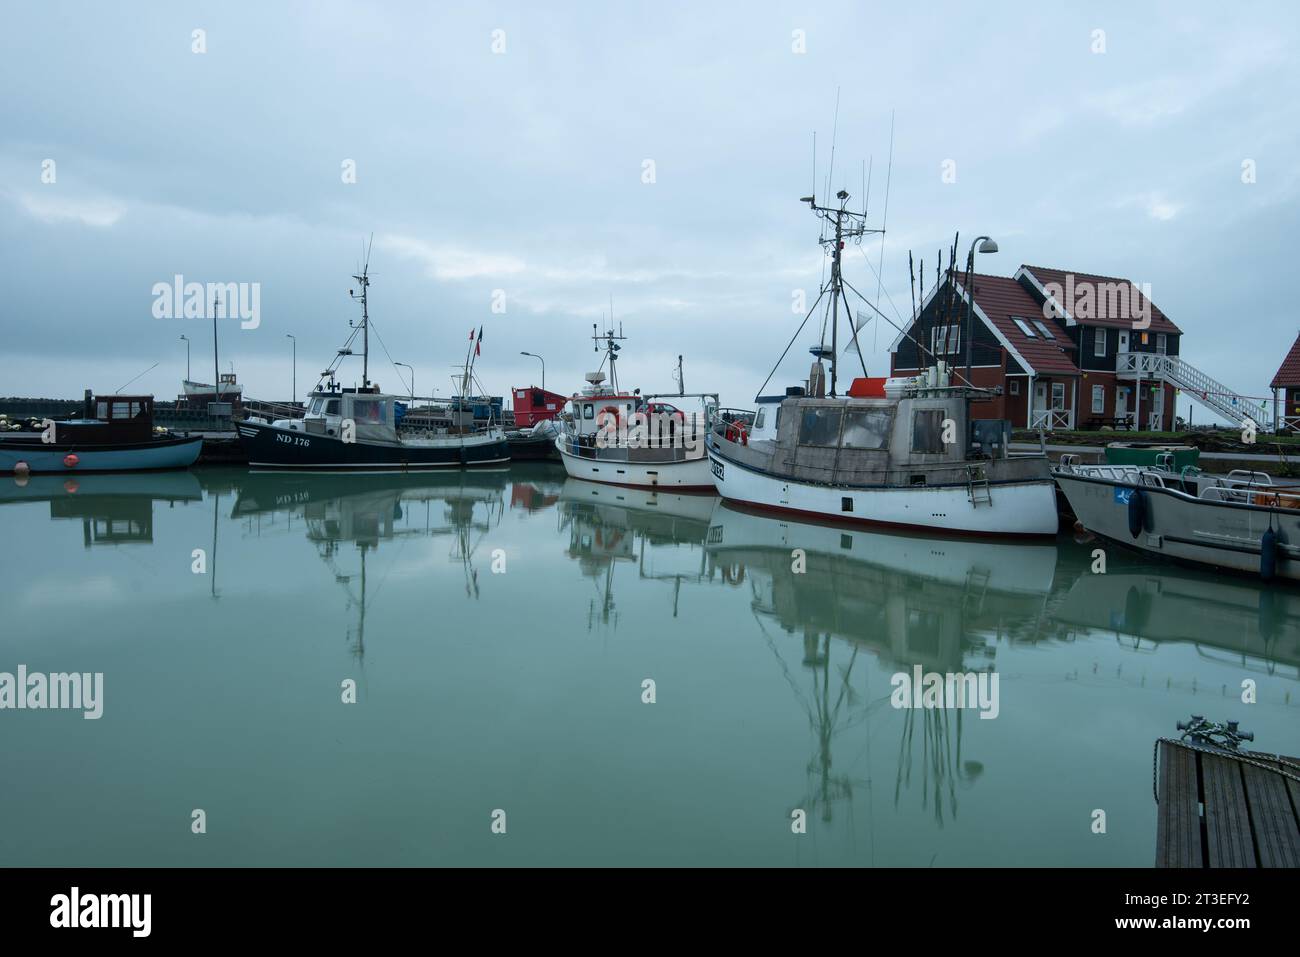 Fishing boats stand in the harbor of Klintholm Havn, Baltic Sea island of Mön, Denmark Stock Photo